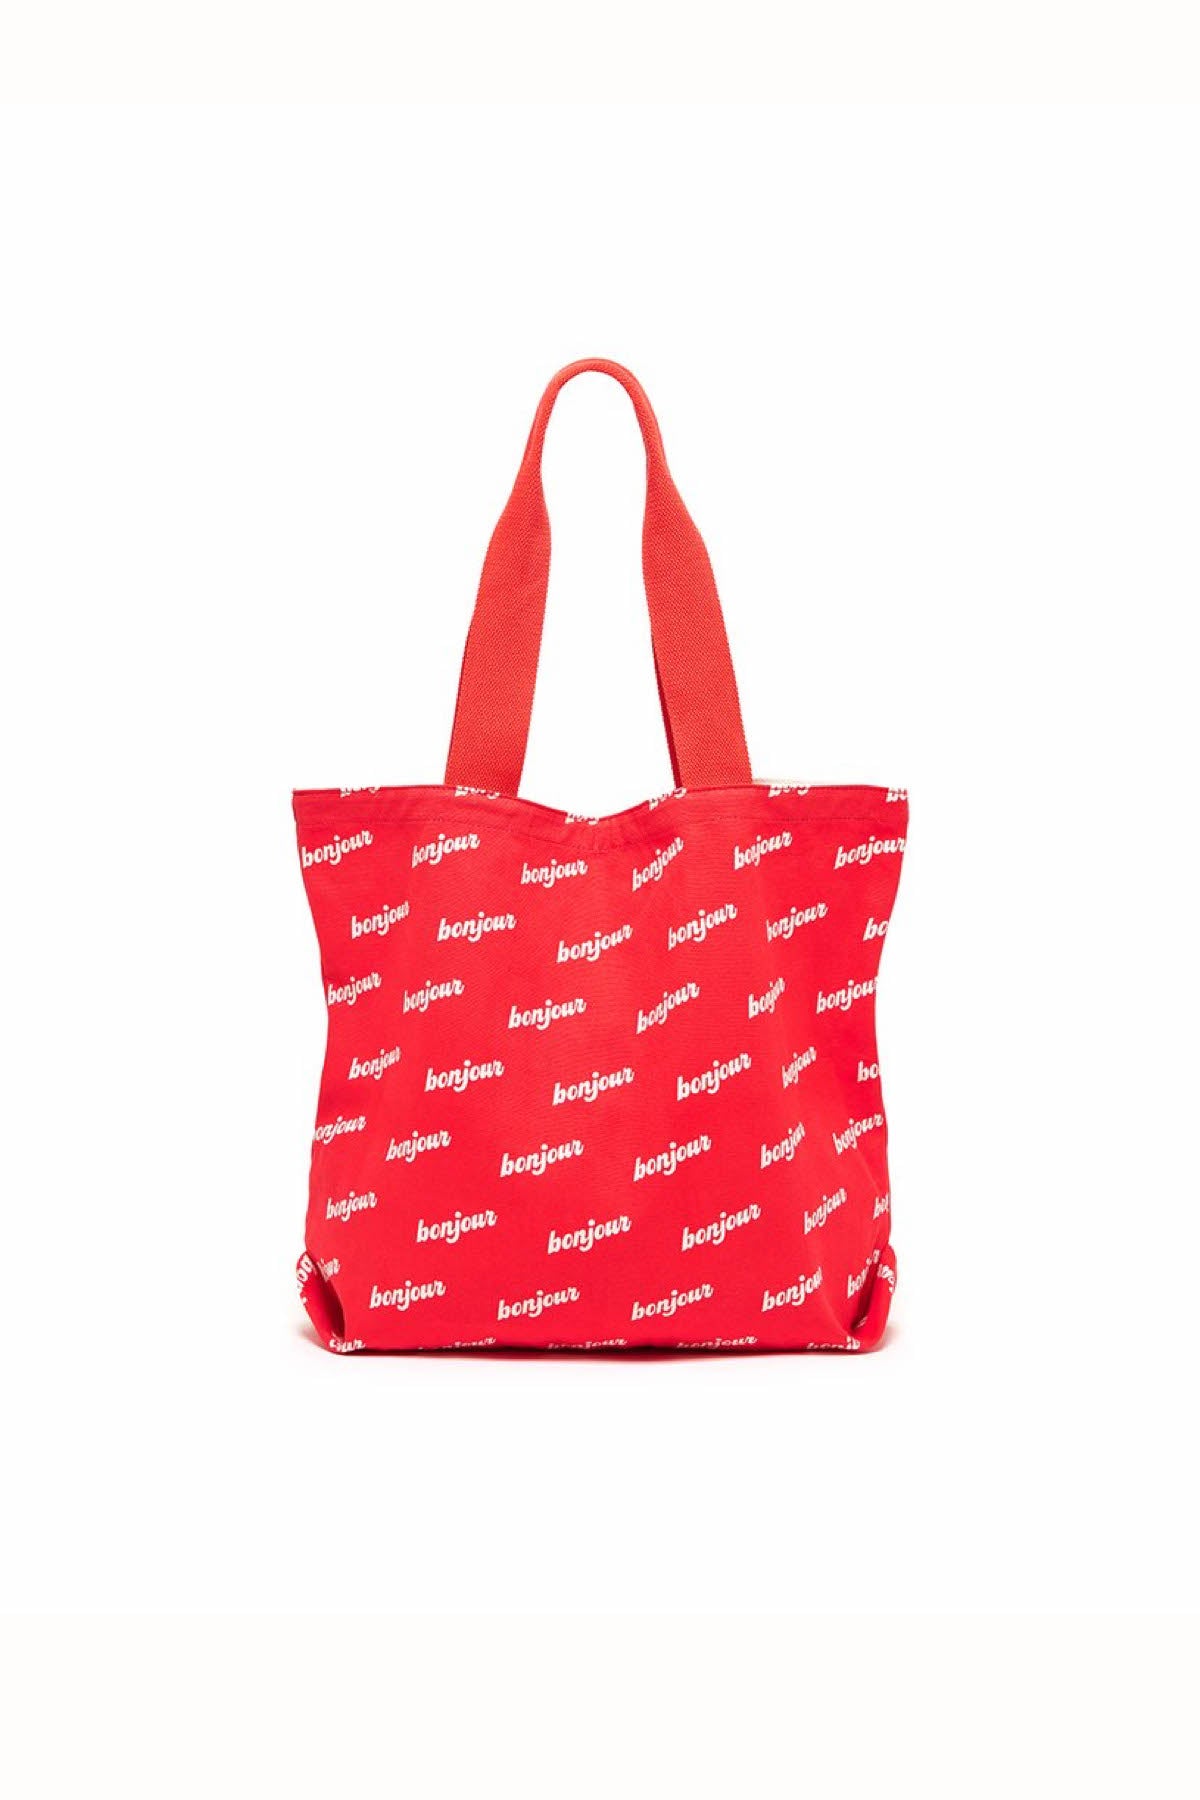 Ban.do Red Bonjour Canvas Tote